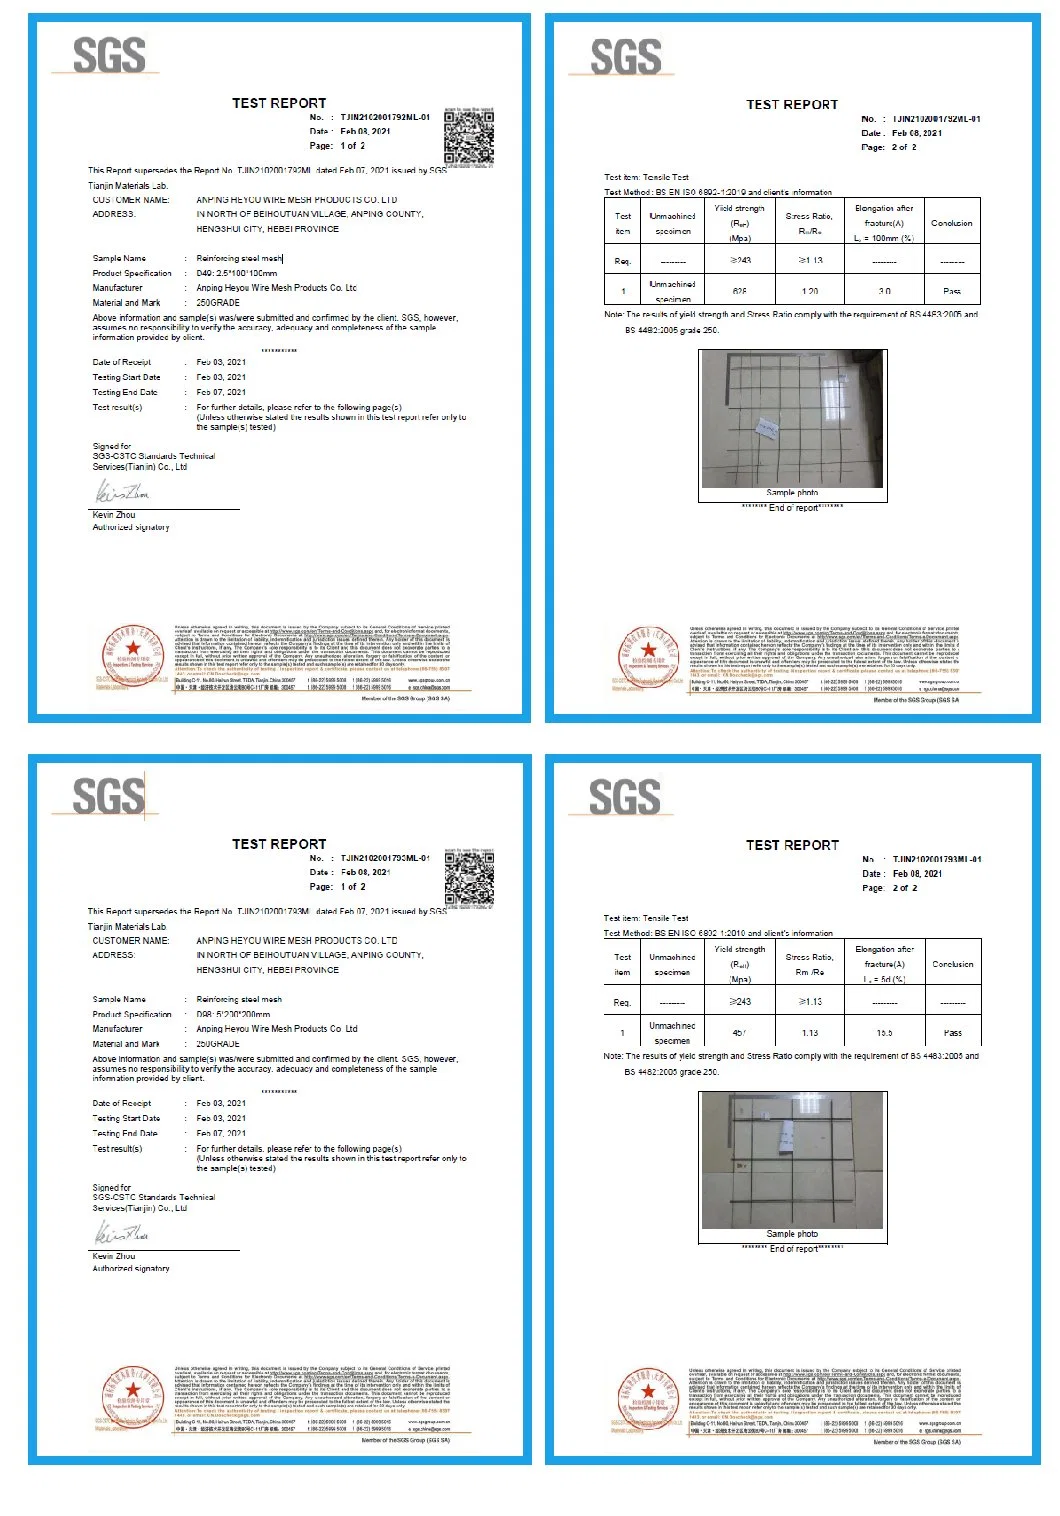 Specialized Production Construction Materials Galvanized Hy Rib Formwork Rib Lath Architectural Metal Mesh Metal Sheet